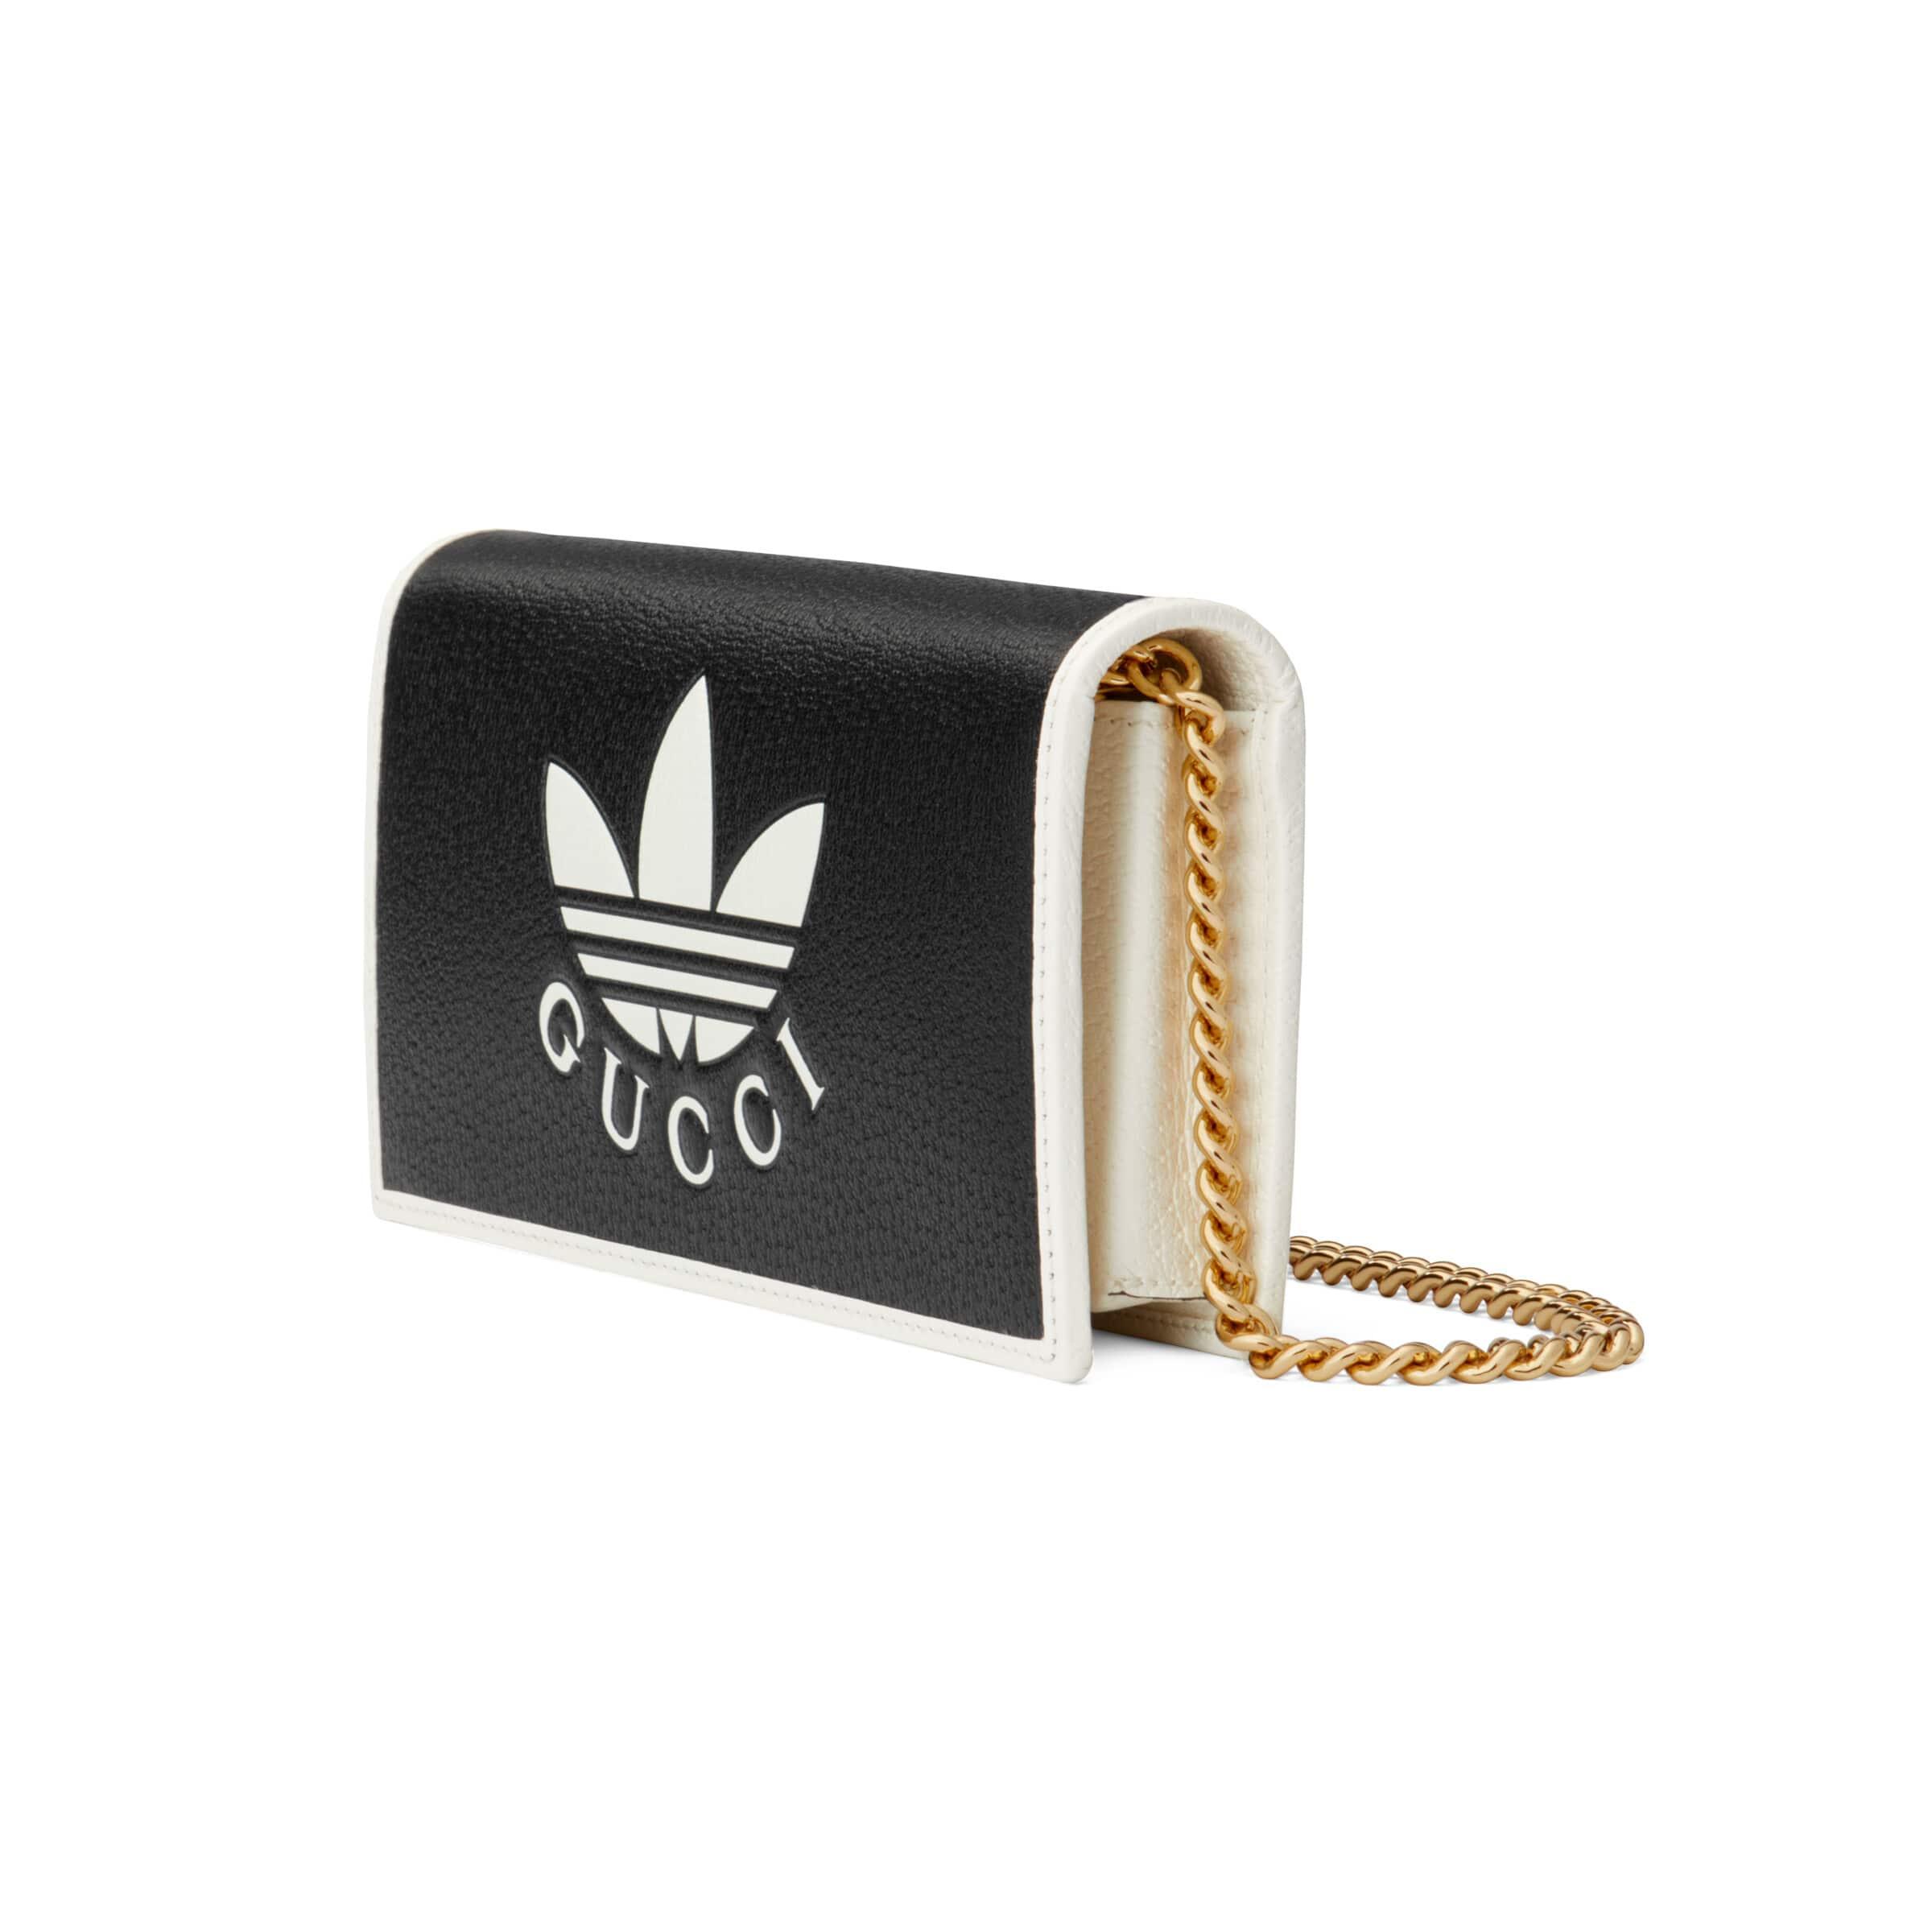 Gucci Adidas X Wallet With Chain in Black | Lyst